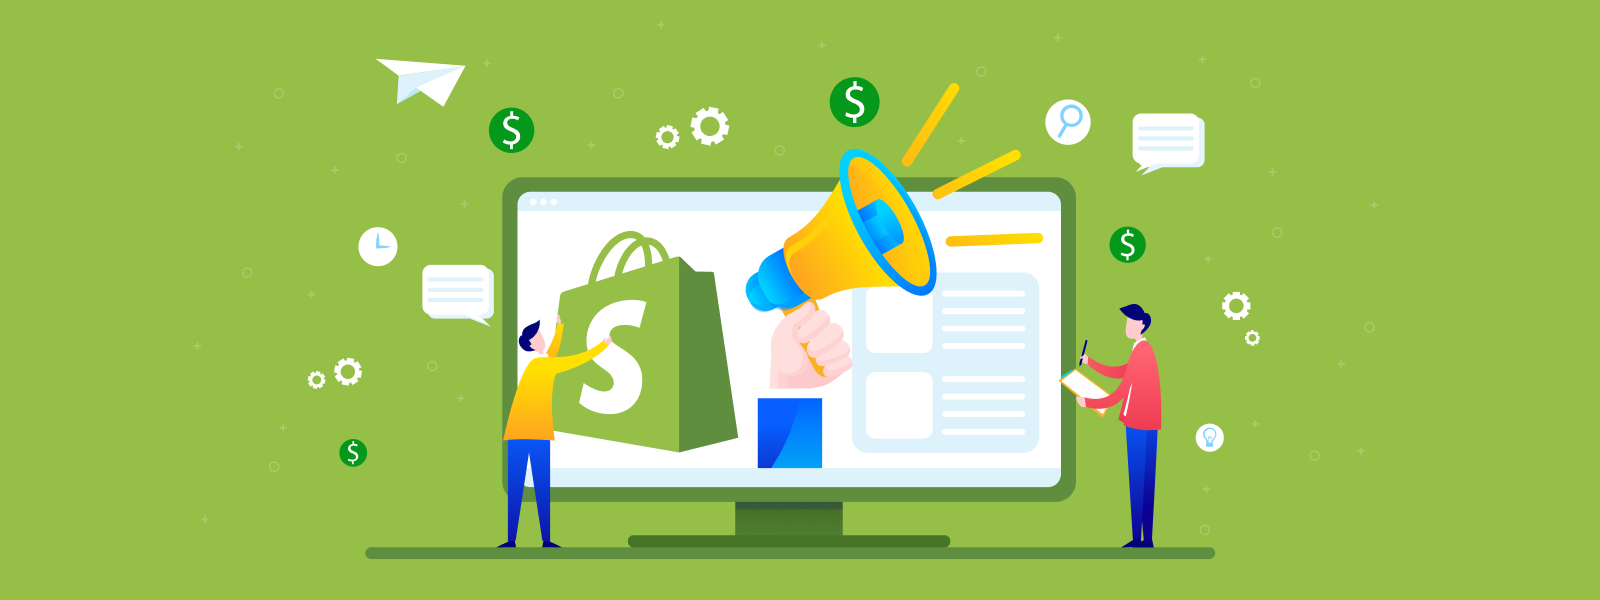 What Is Shopify Marketing?